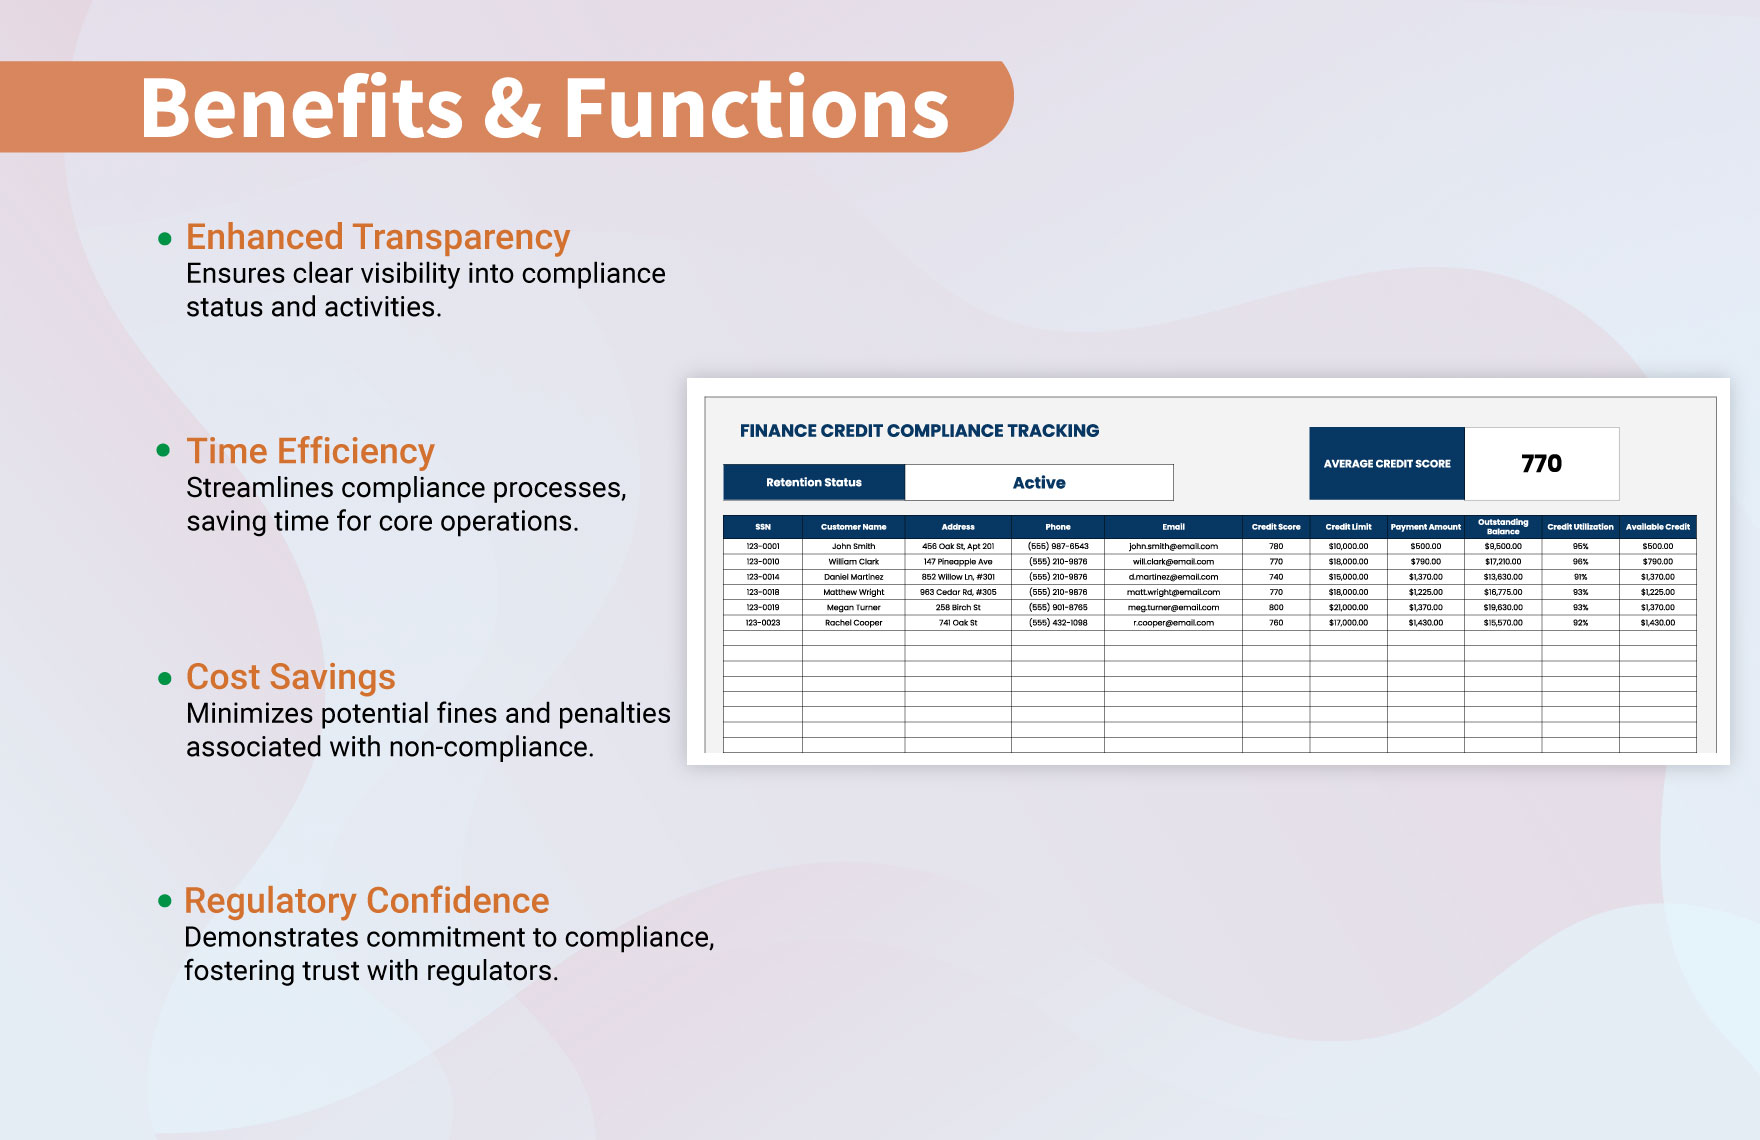 Finance Credit Compliance Tracking Template